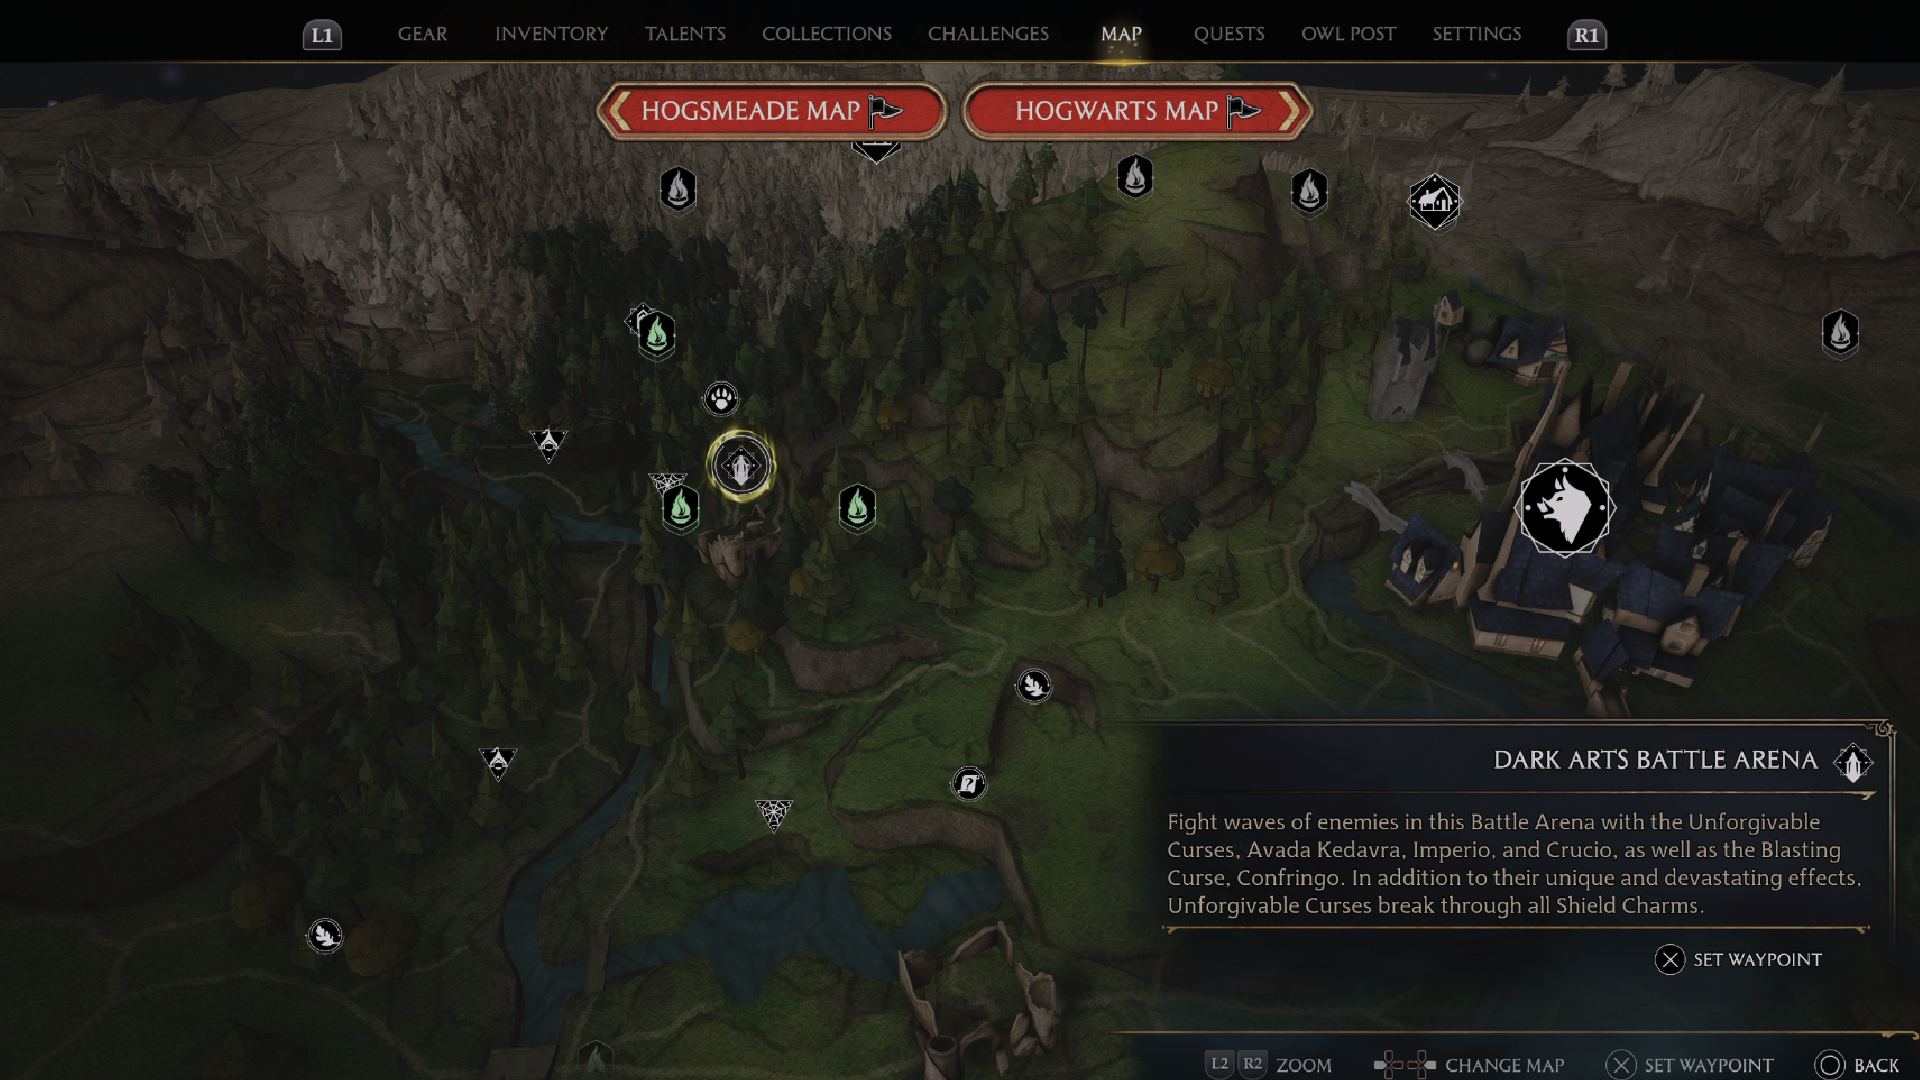 Hogwarts Legacy Troll Locations: The Dark Arts Battle Arena can be seen